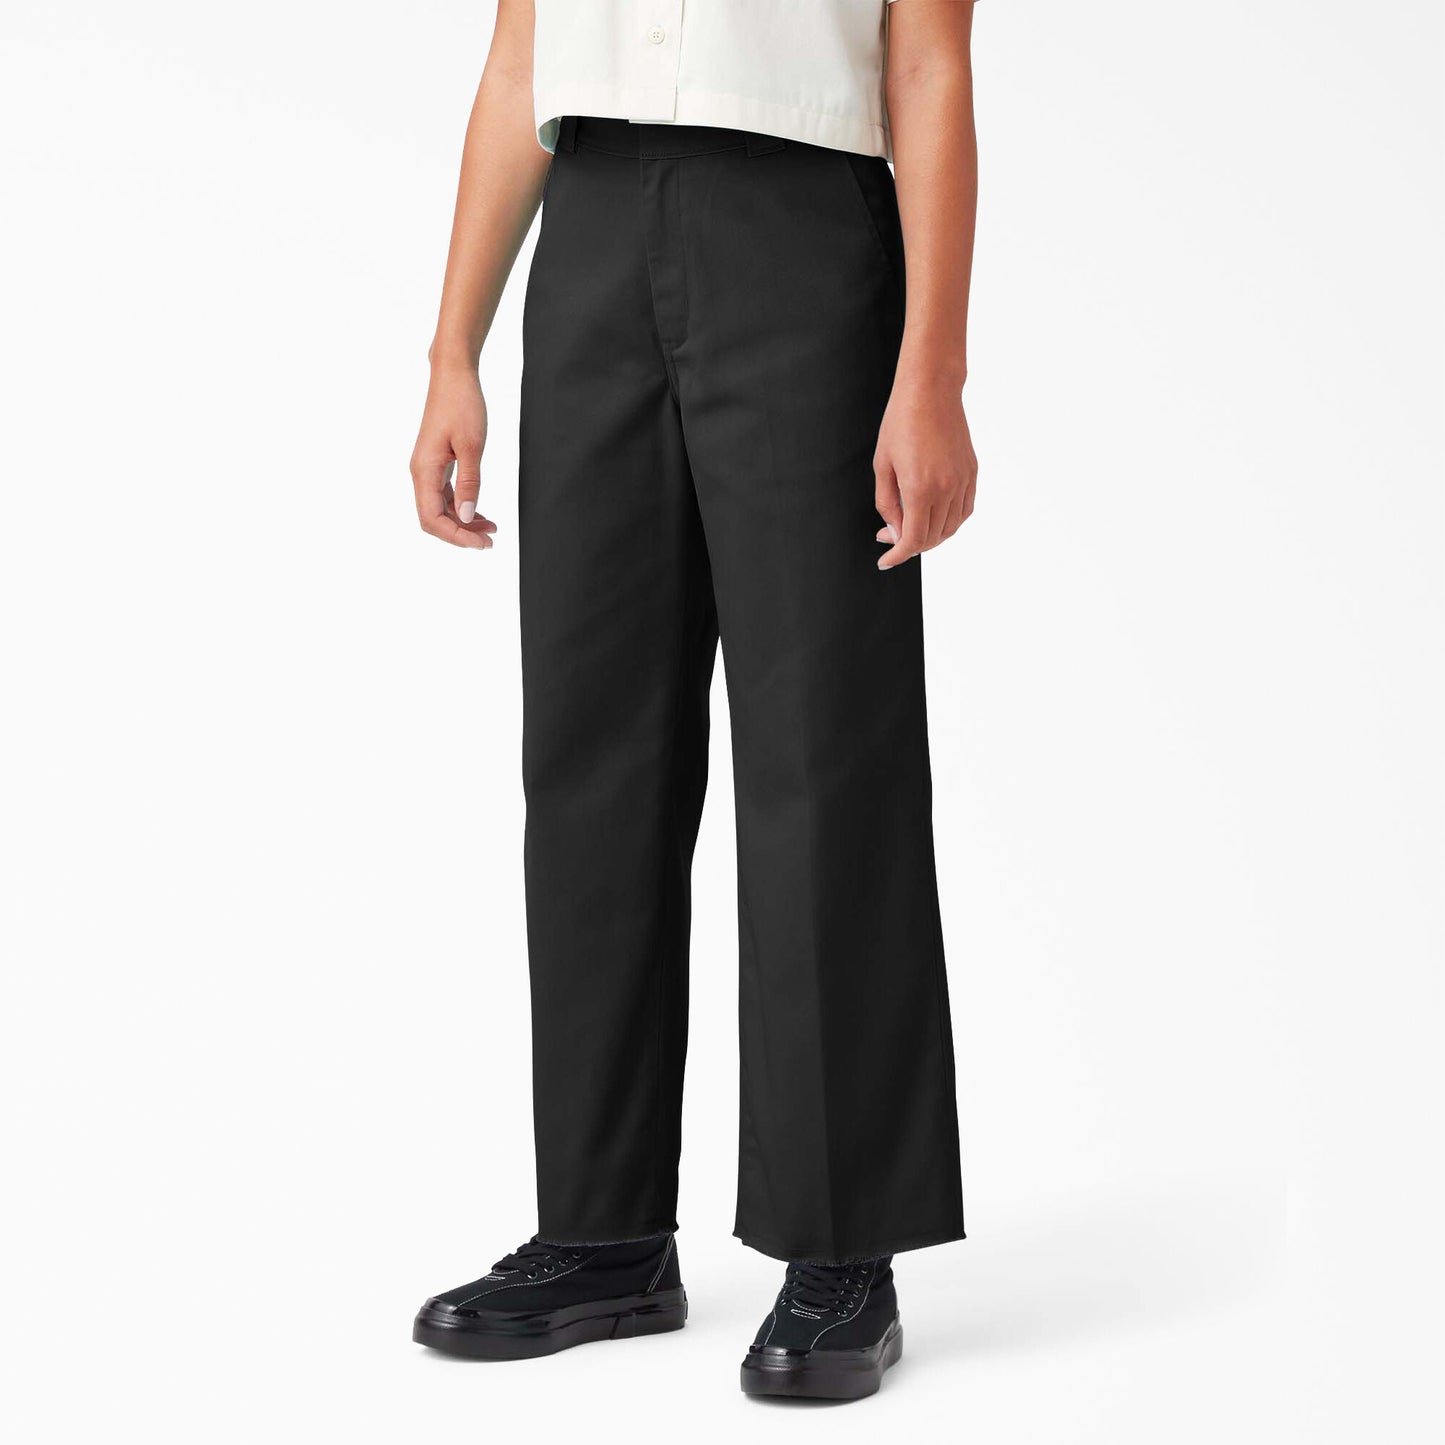 Dickies Women's Twill Cropped Ankle Pant